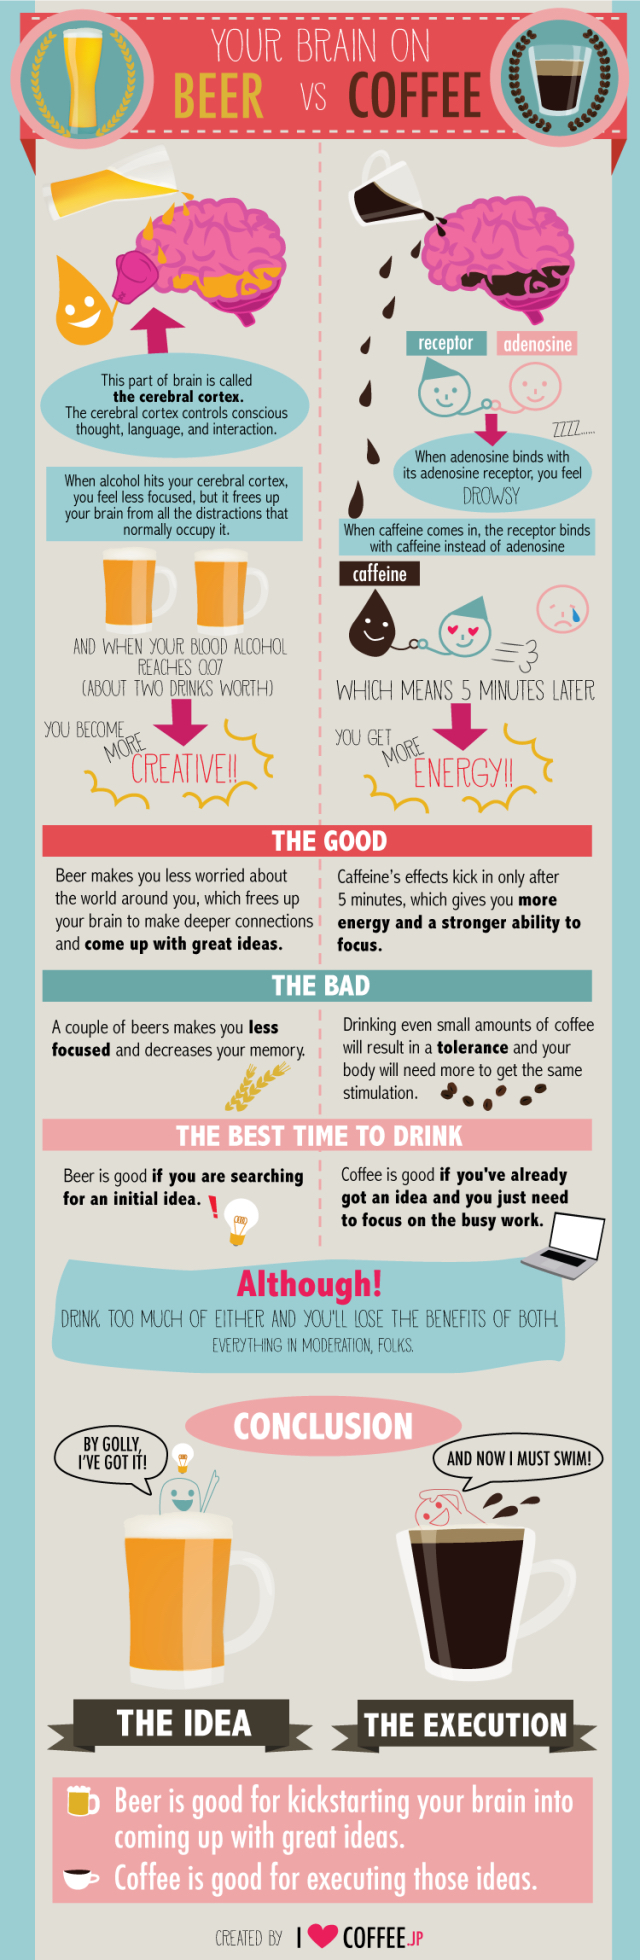 how-beer-and-coffee-affect-your-brain-640x1960